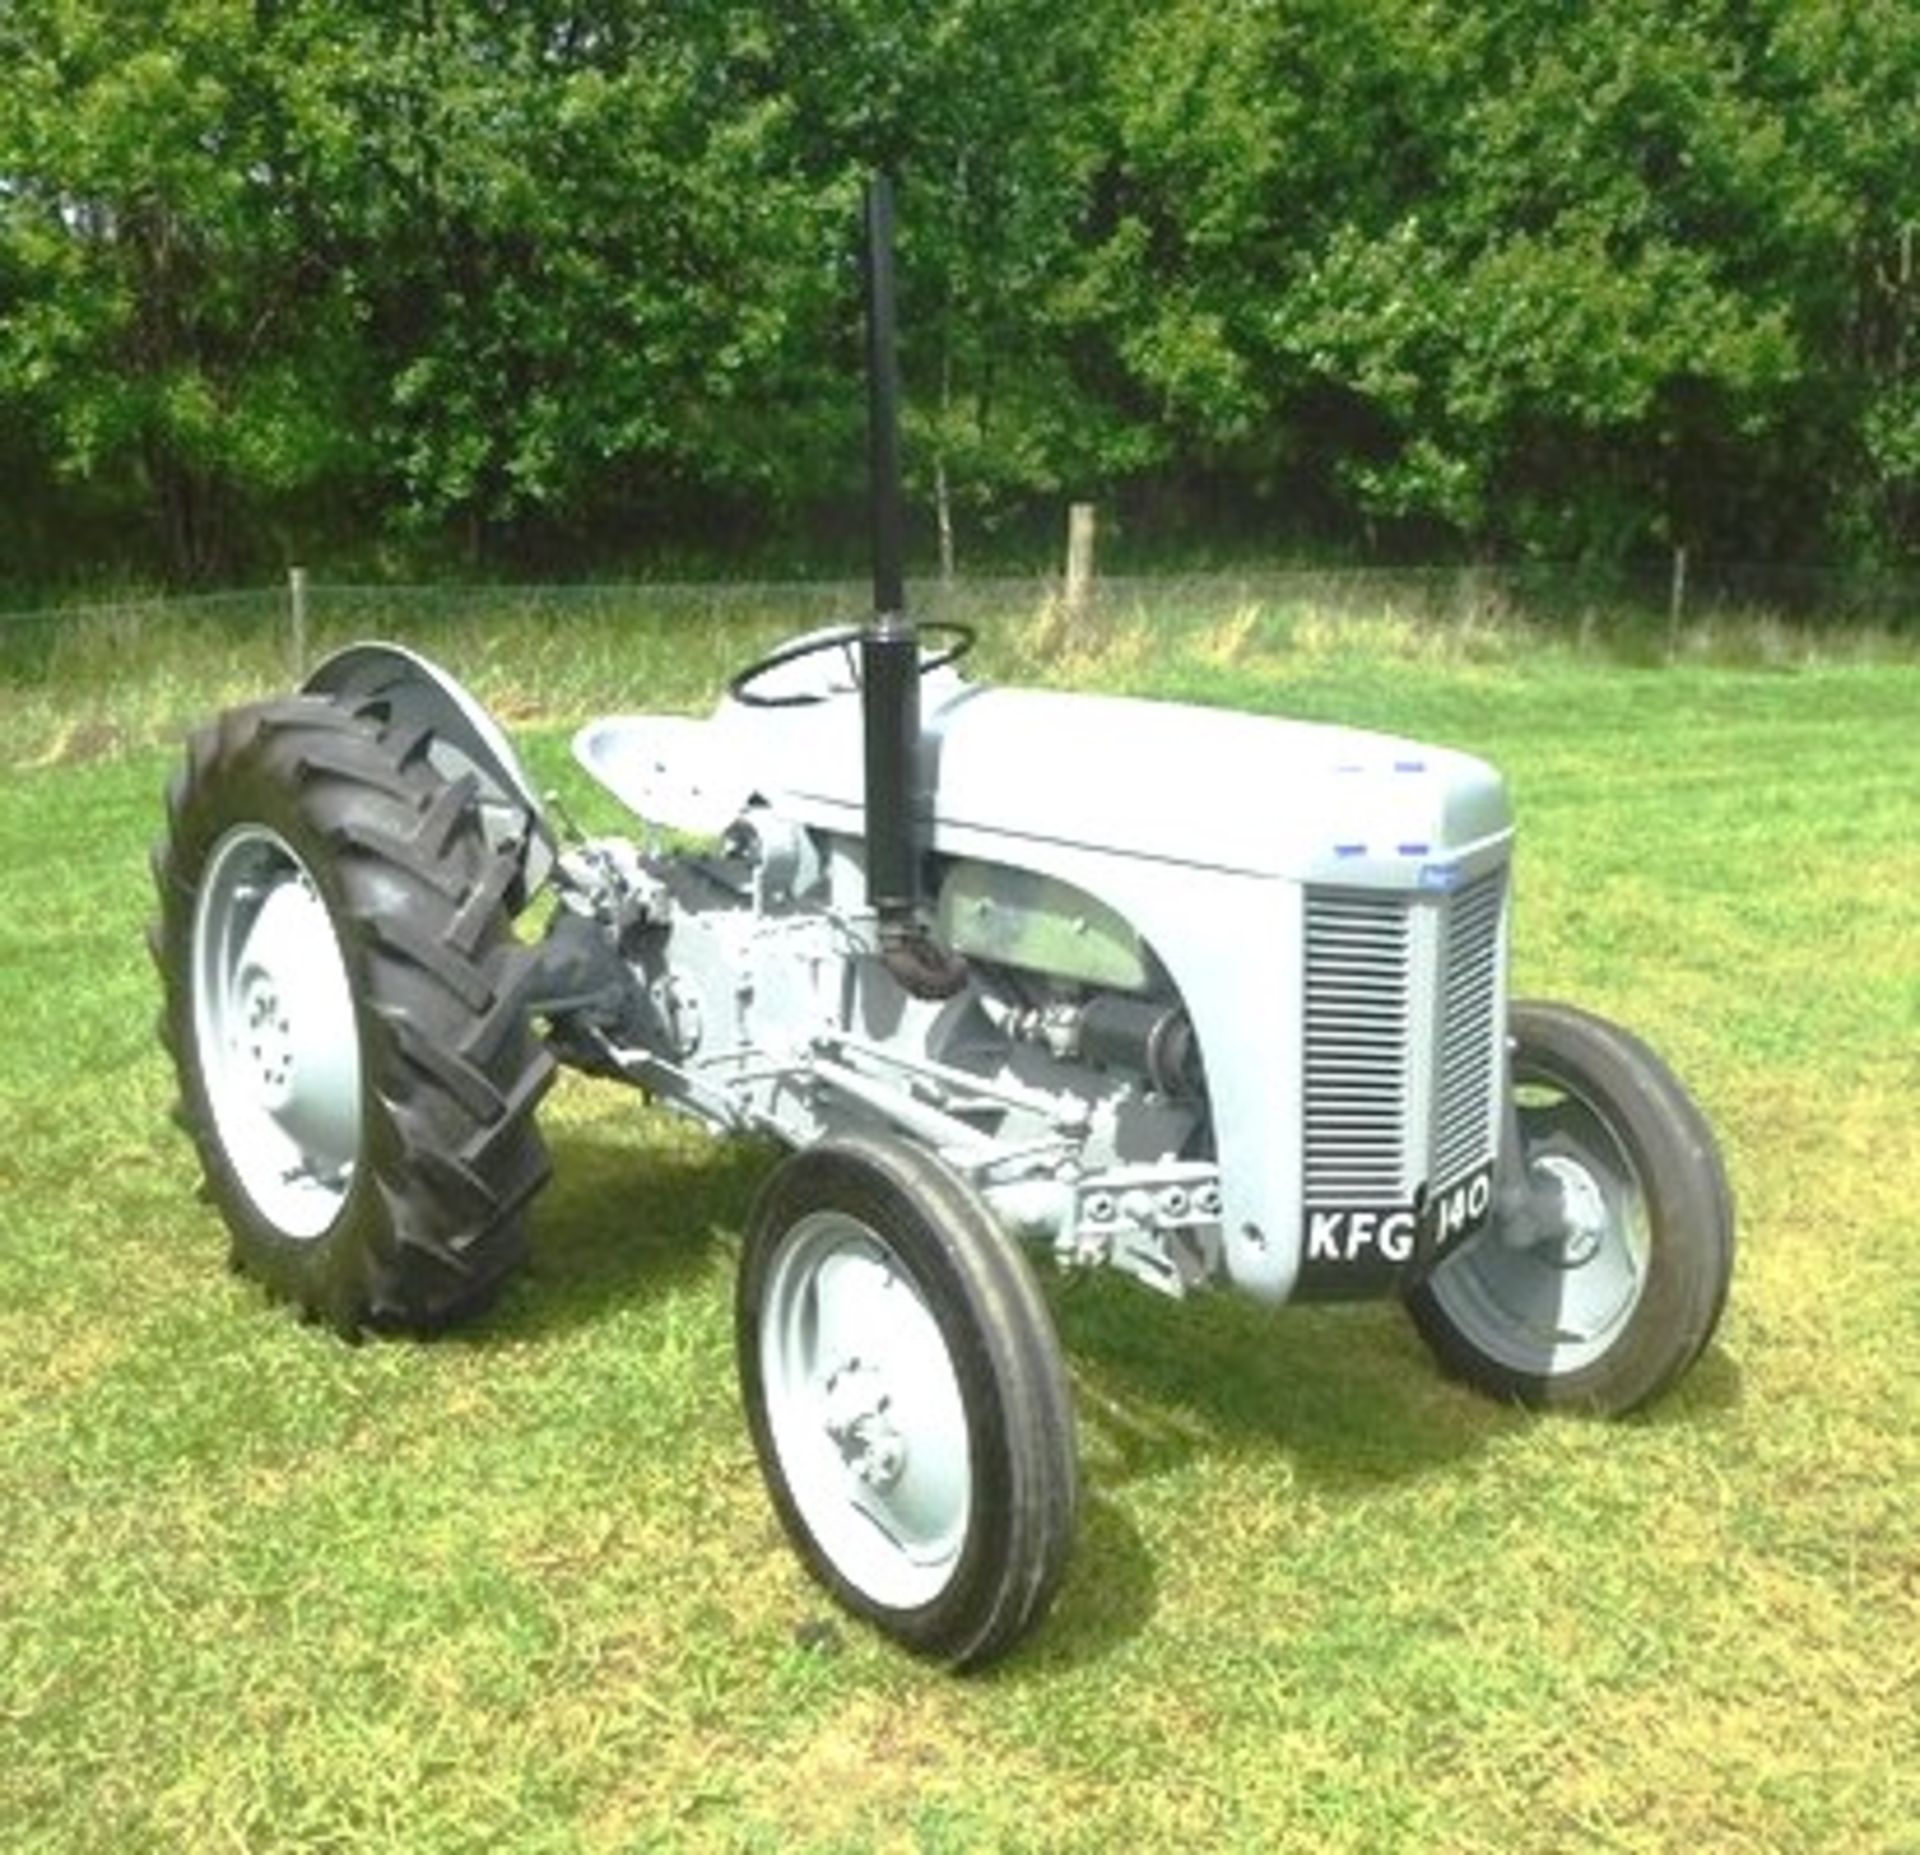 1951 MASSEY FERGUSON TED20 PETROL TRACTOR (GREY) MILEAGE NOT KNOWN - NO DIAL - Image 6 of 12